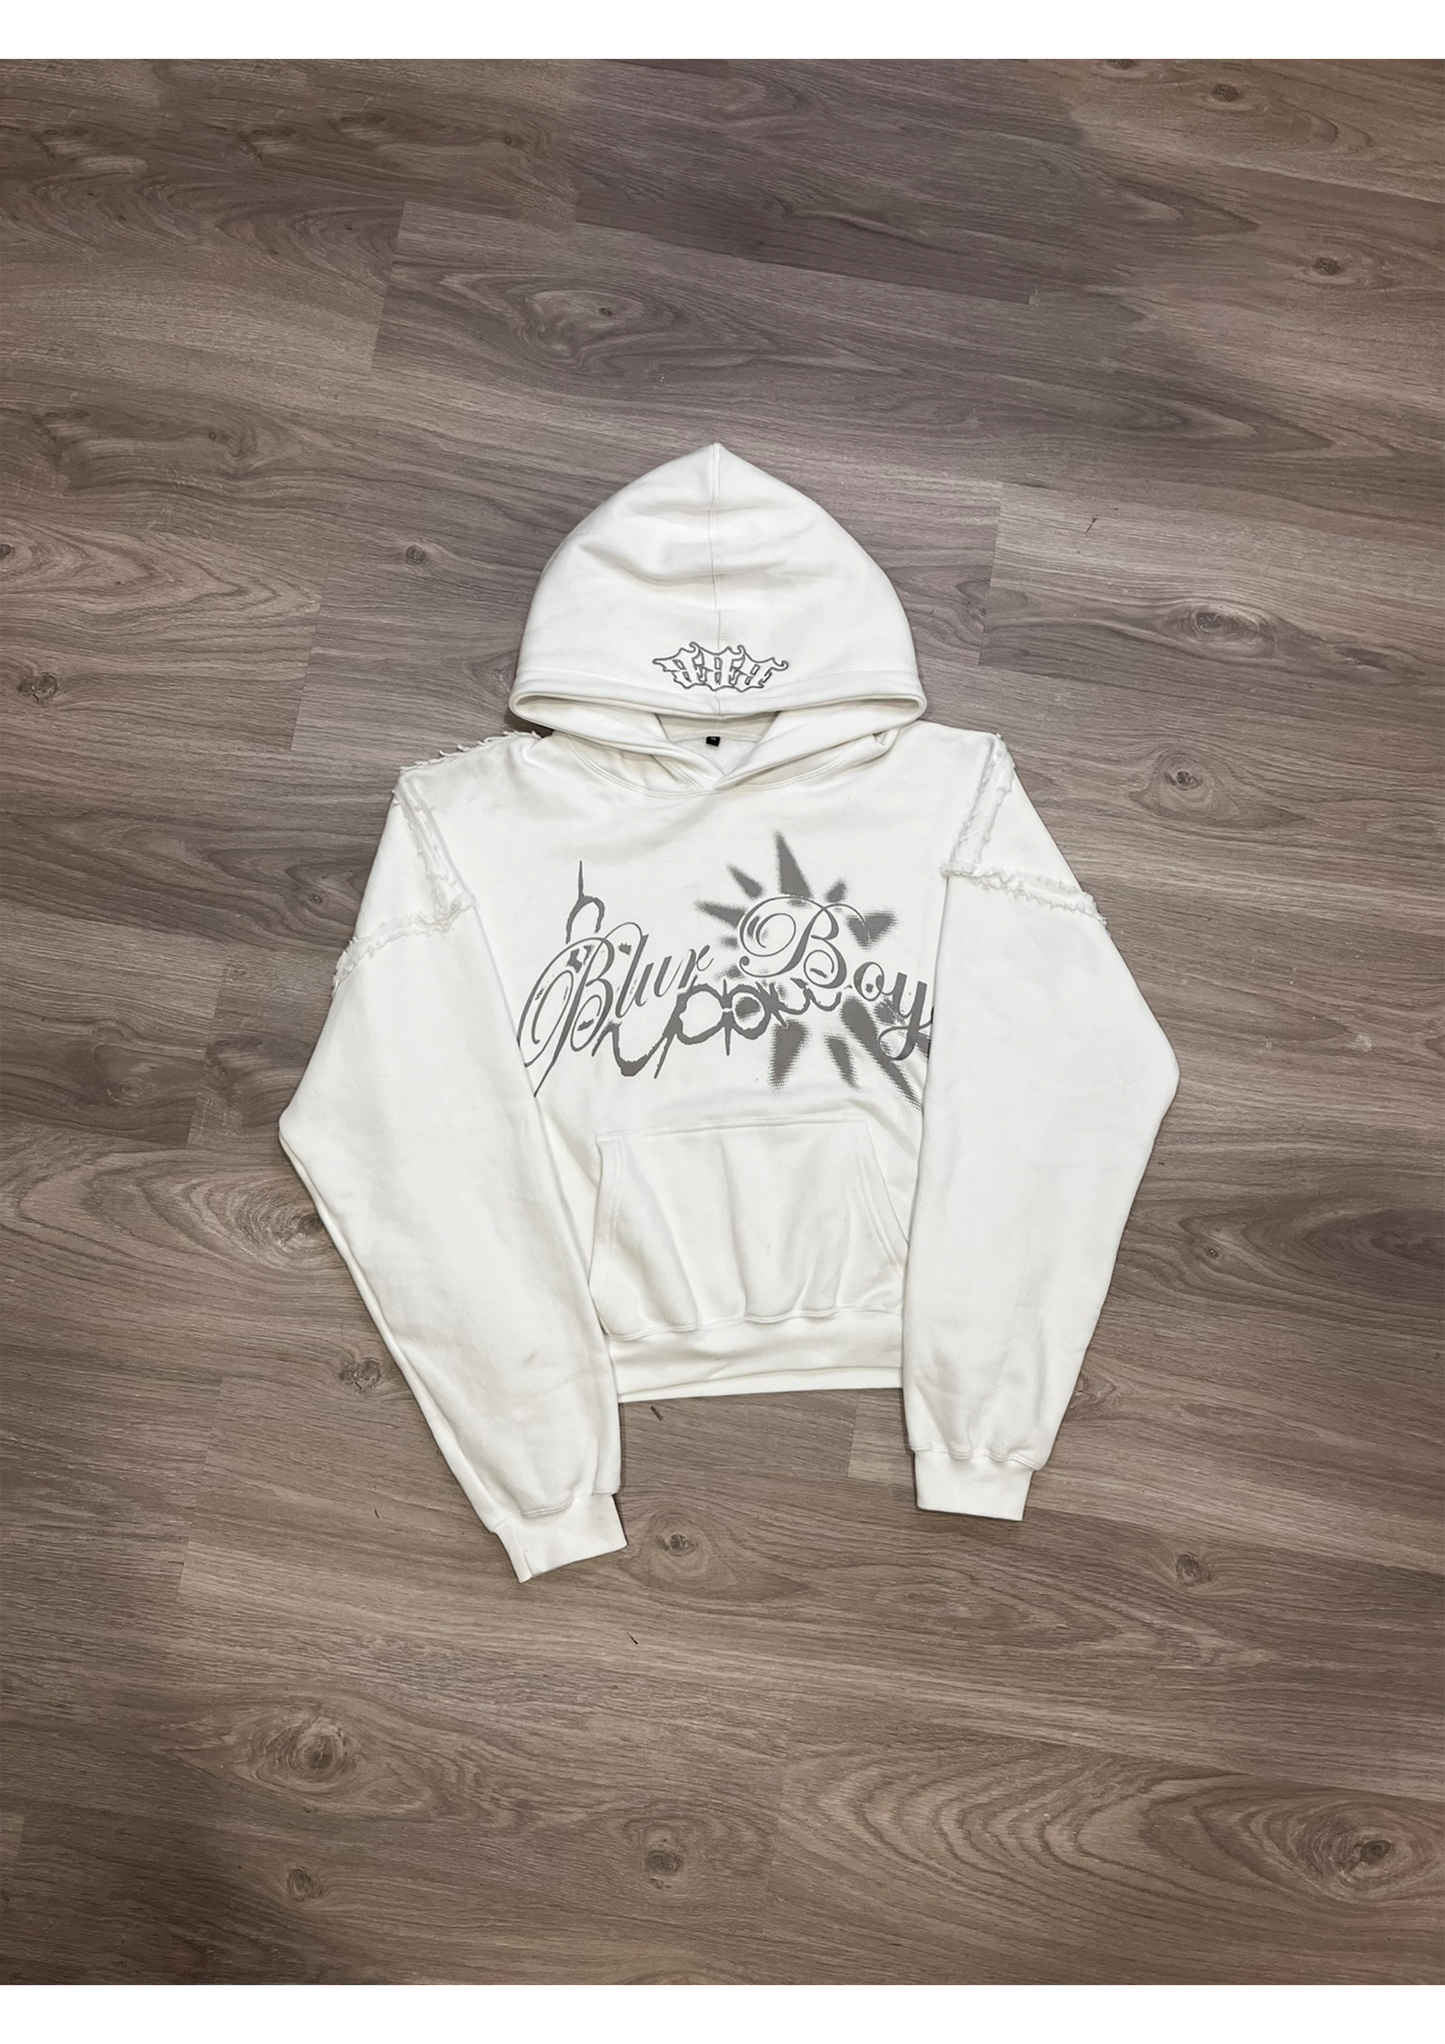 Perfect Ripped Hoodie White